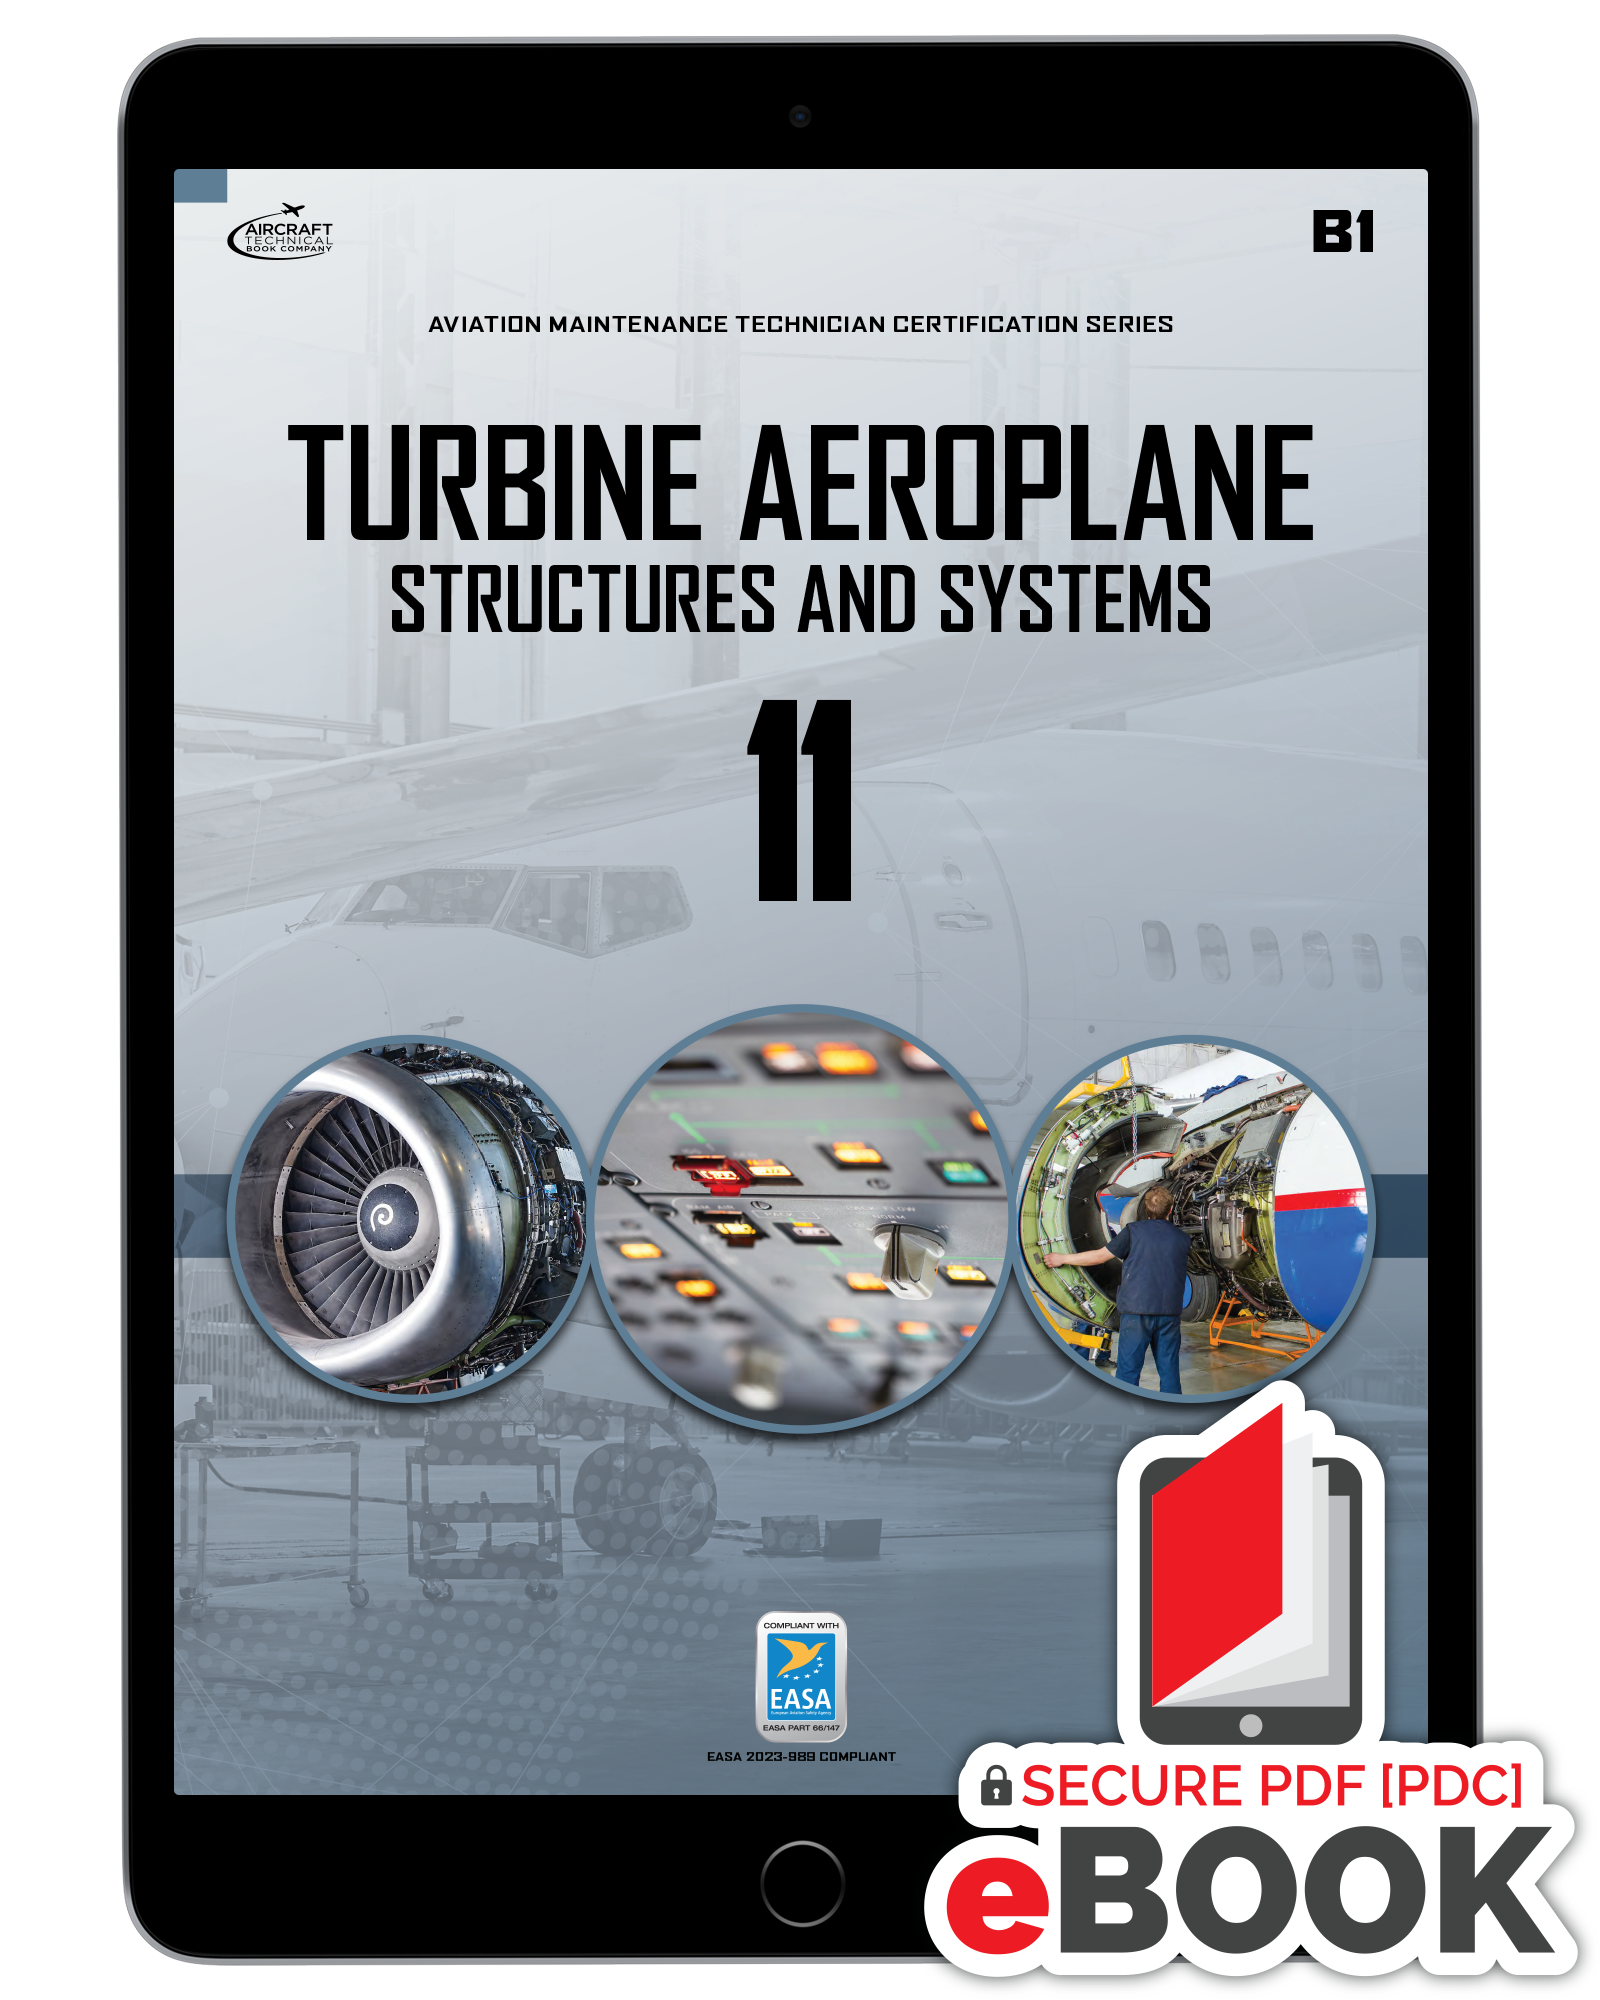 Turbine Aeroplane Structures and Systems: Module 11 (B1) - eBook